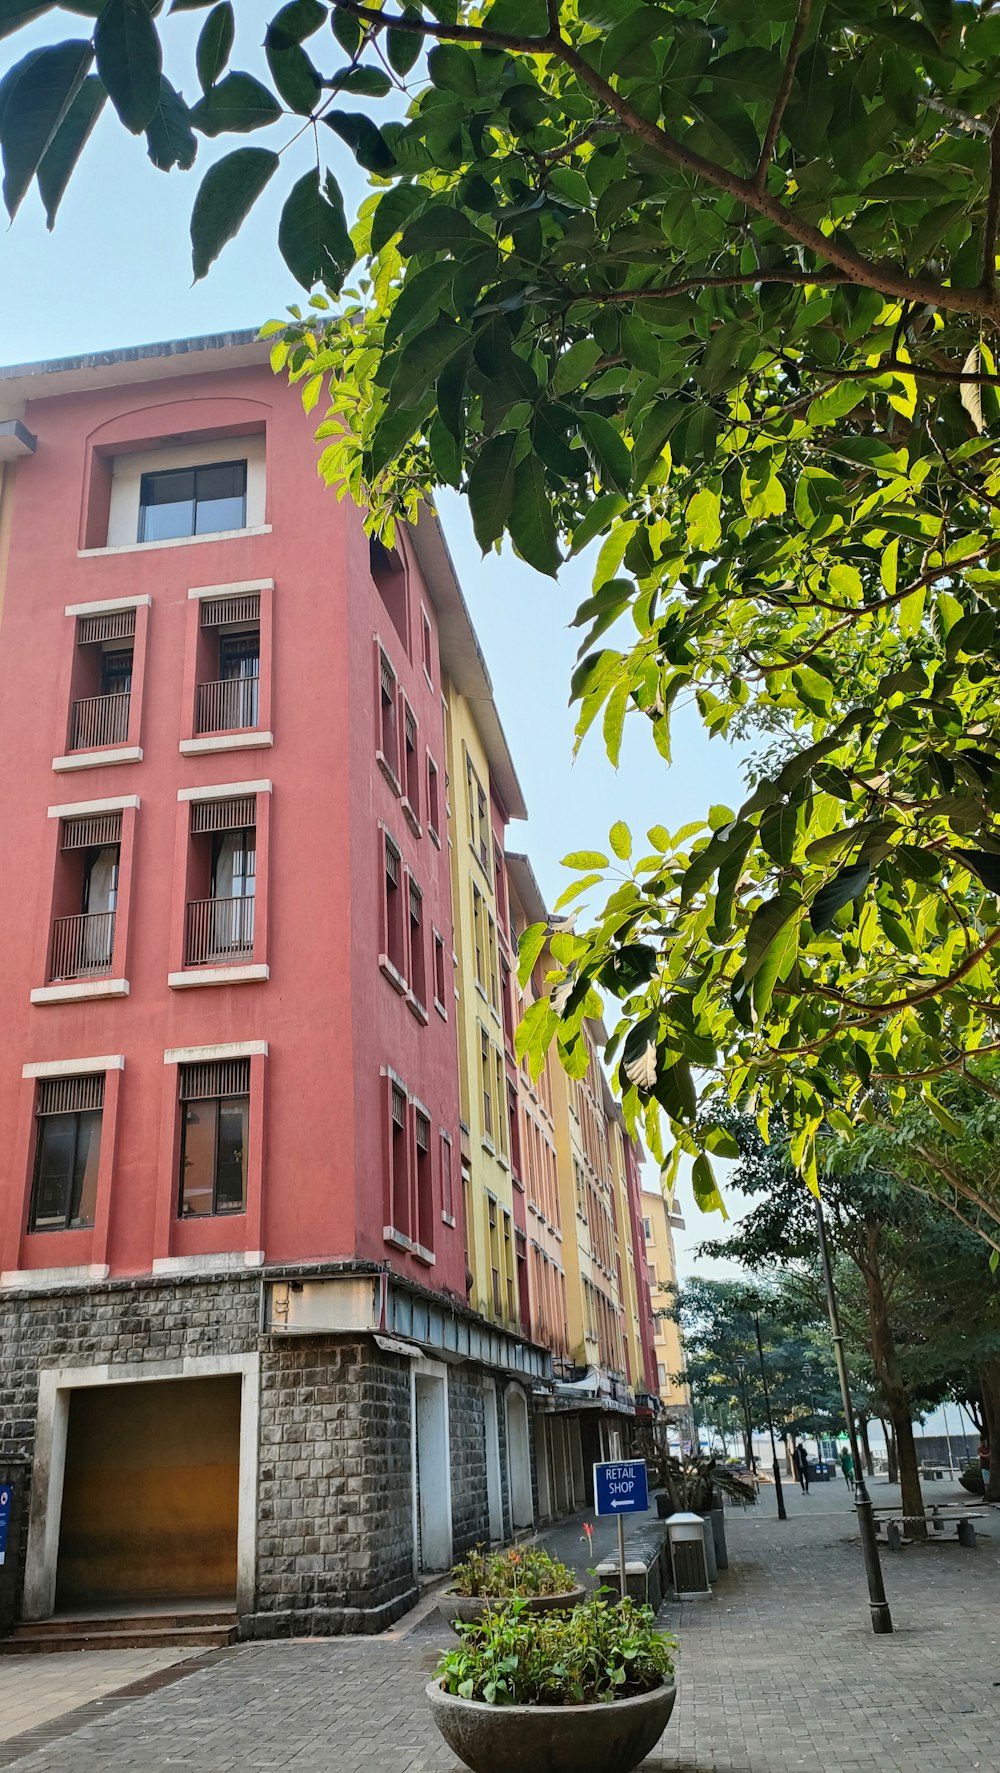 a tall red building sitting on the side of a street